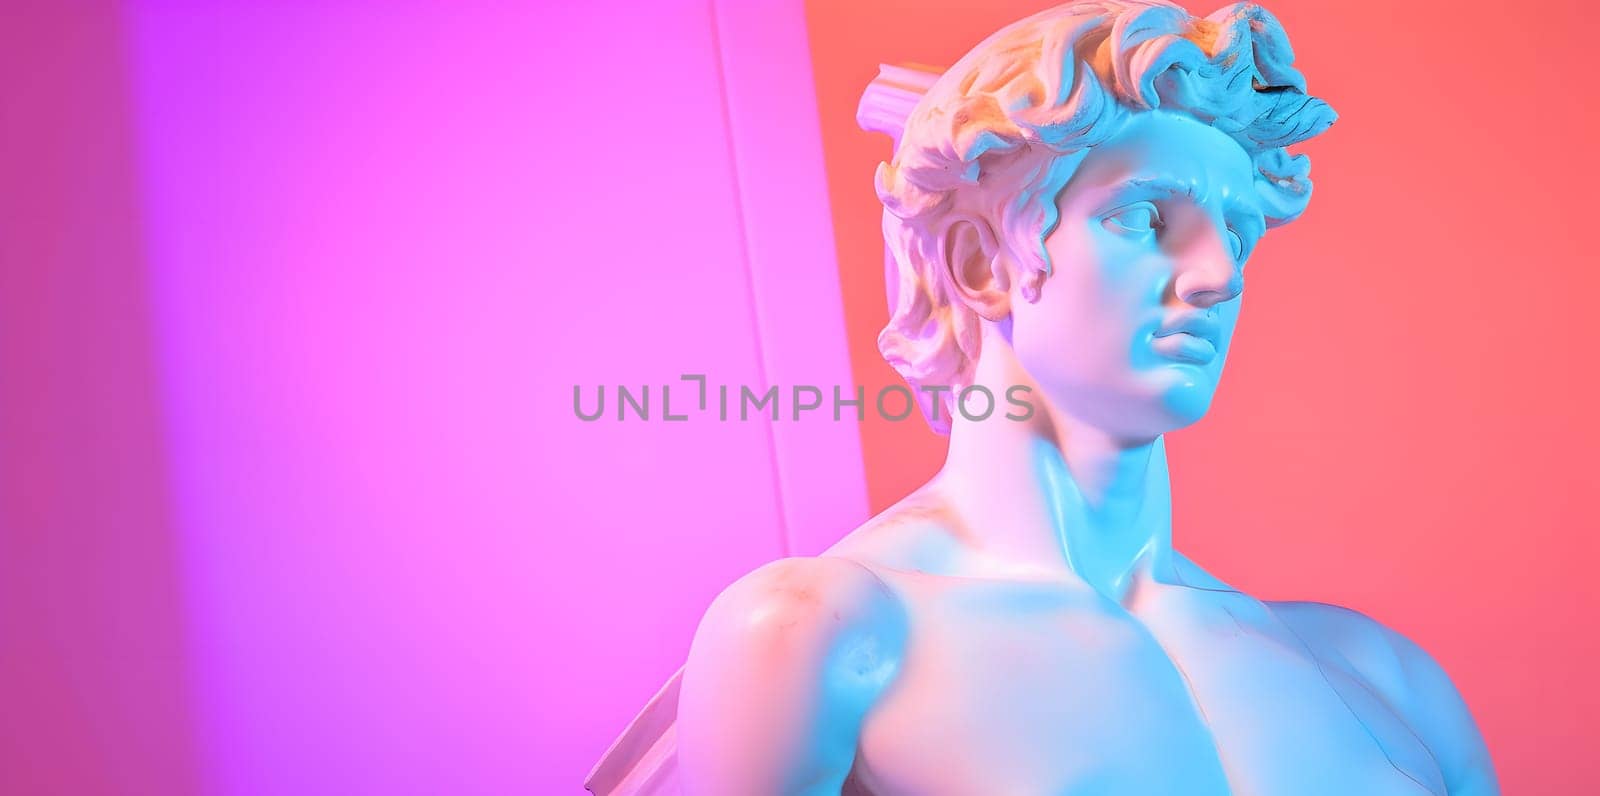 white sculpture of an abstract greek deity brightly lit with neon colors. Neural network generated in May 2023. Not based on any actual person, scene or pattern.